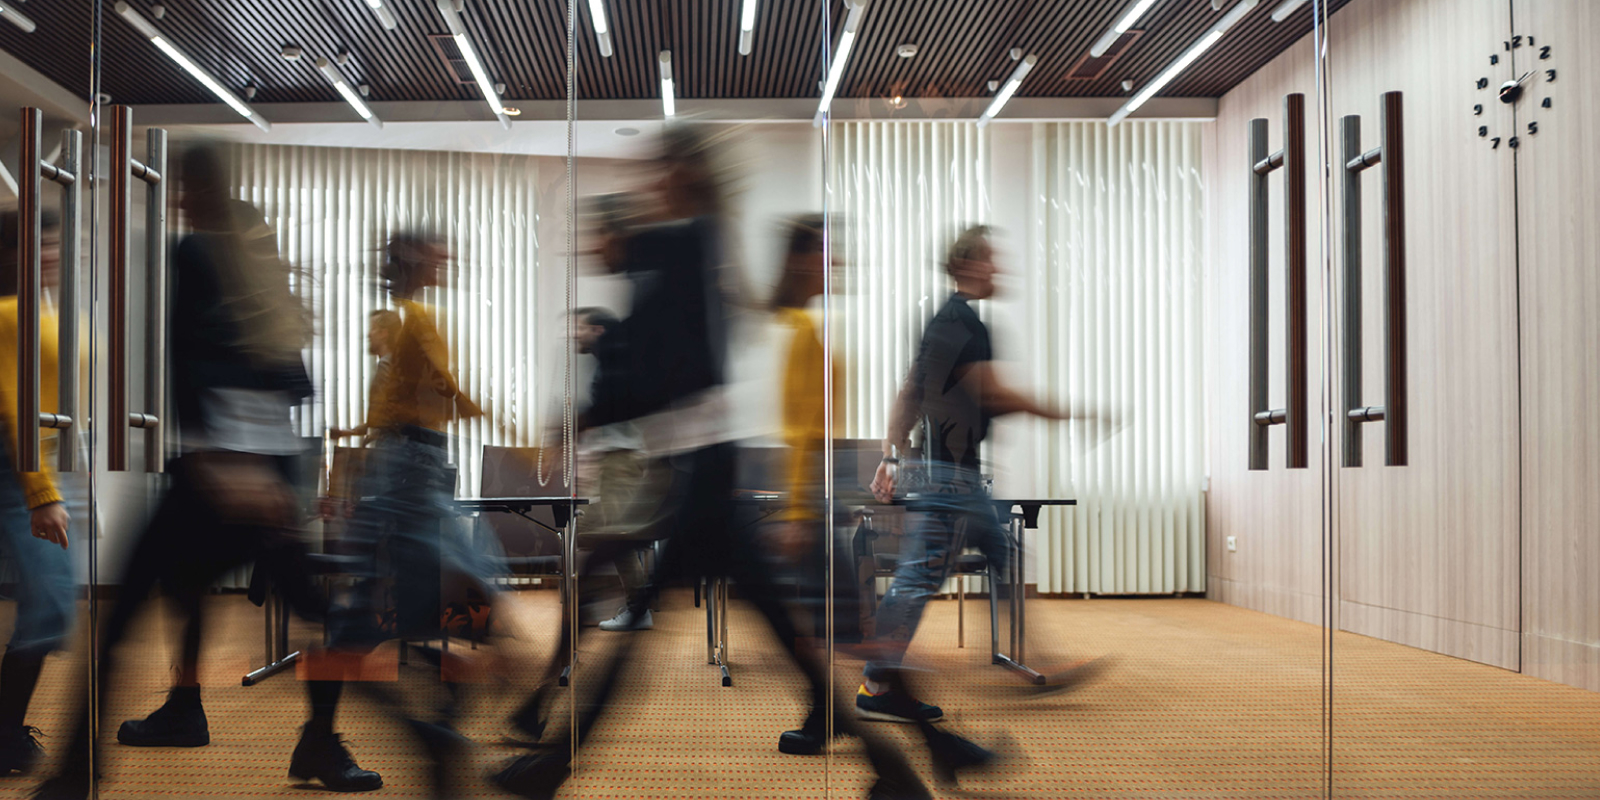 Office room with blurred images of people walking back and forth